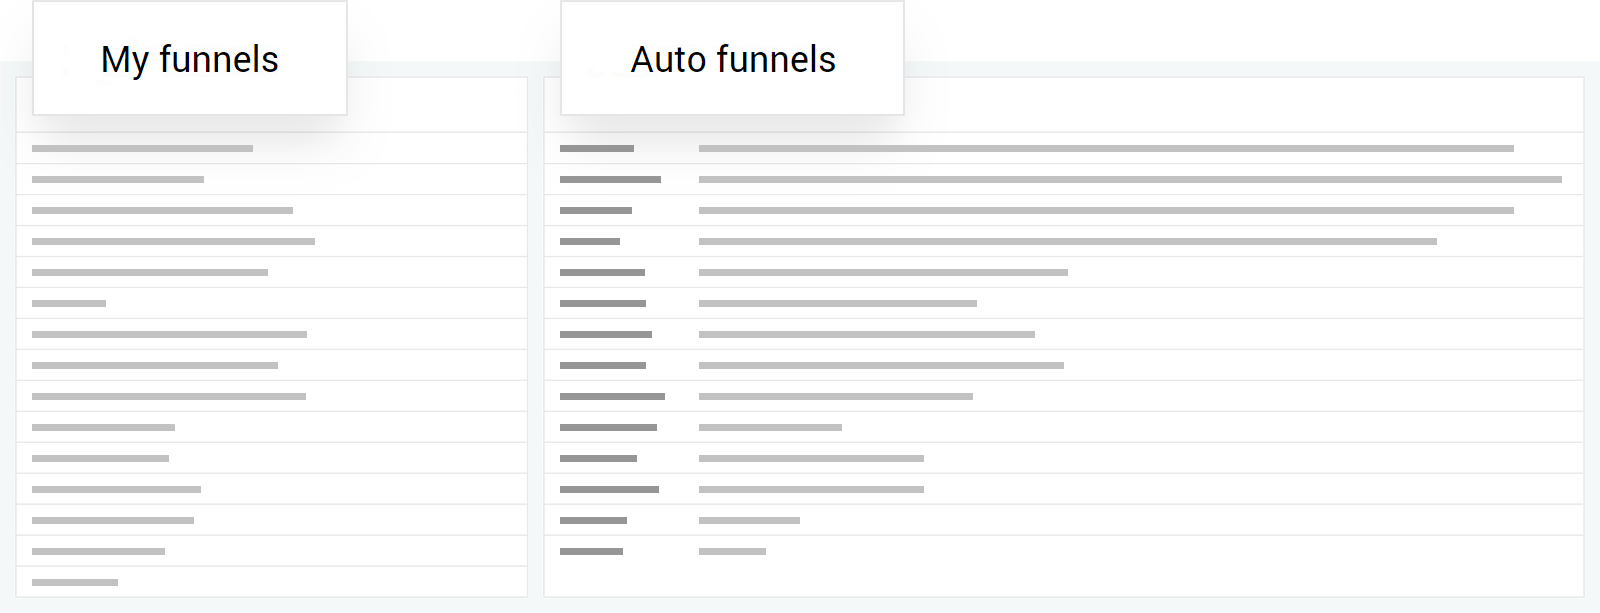 Automated funnel creation